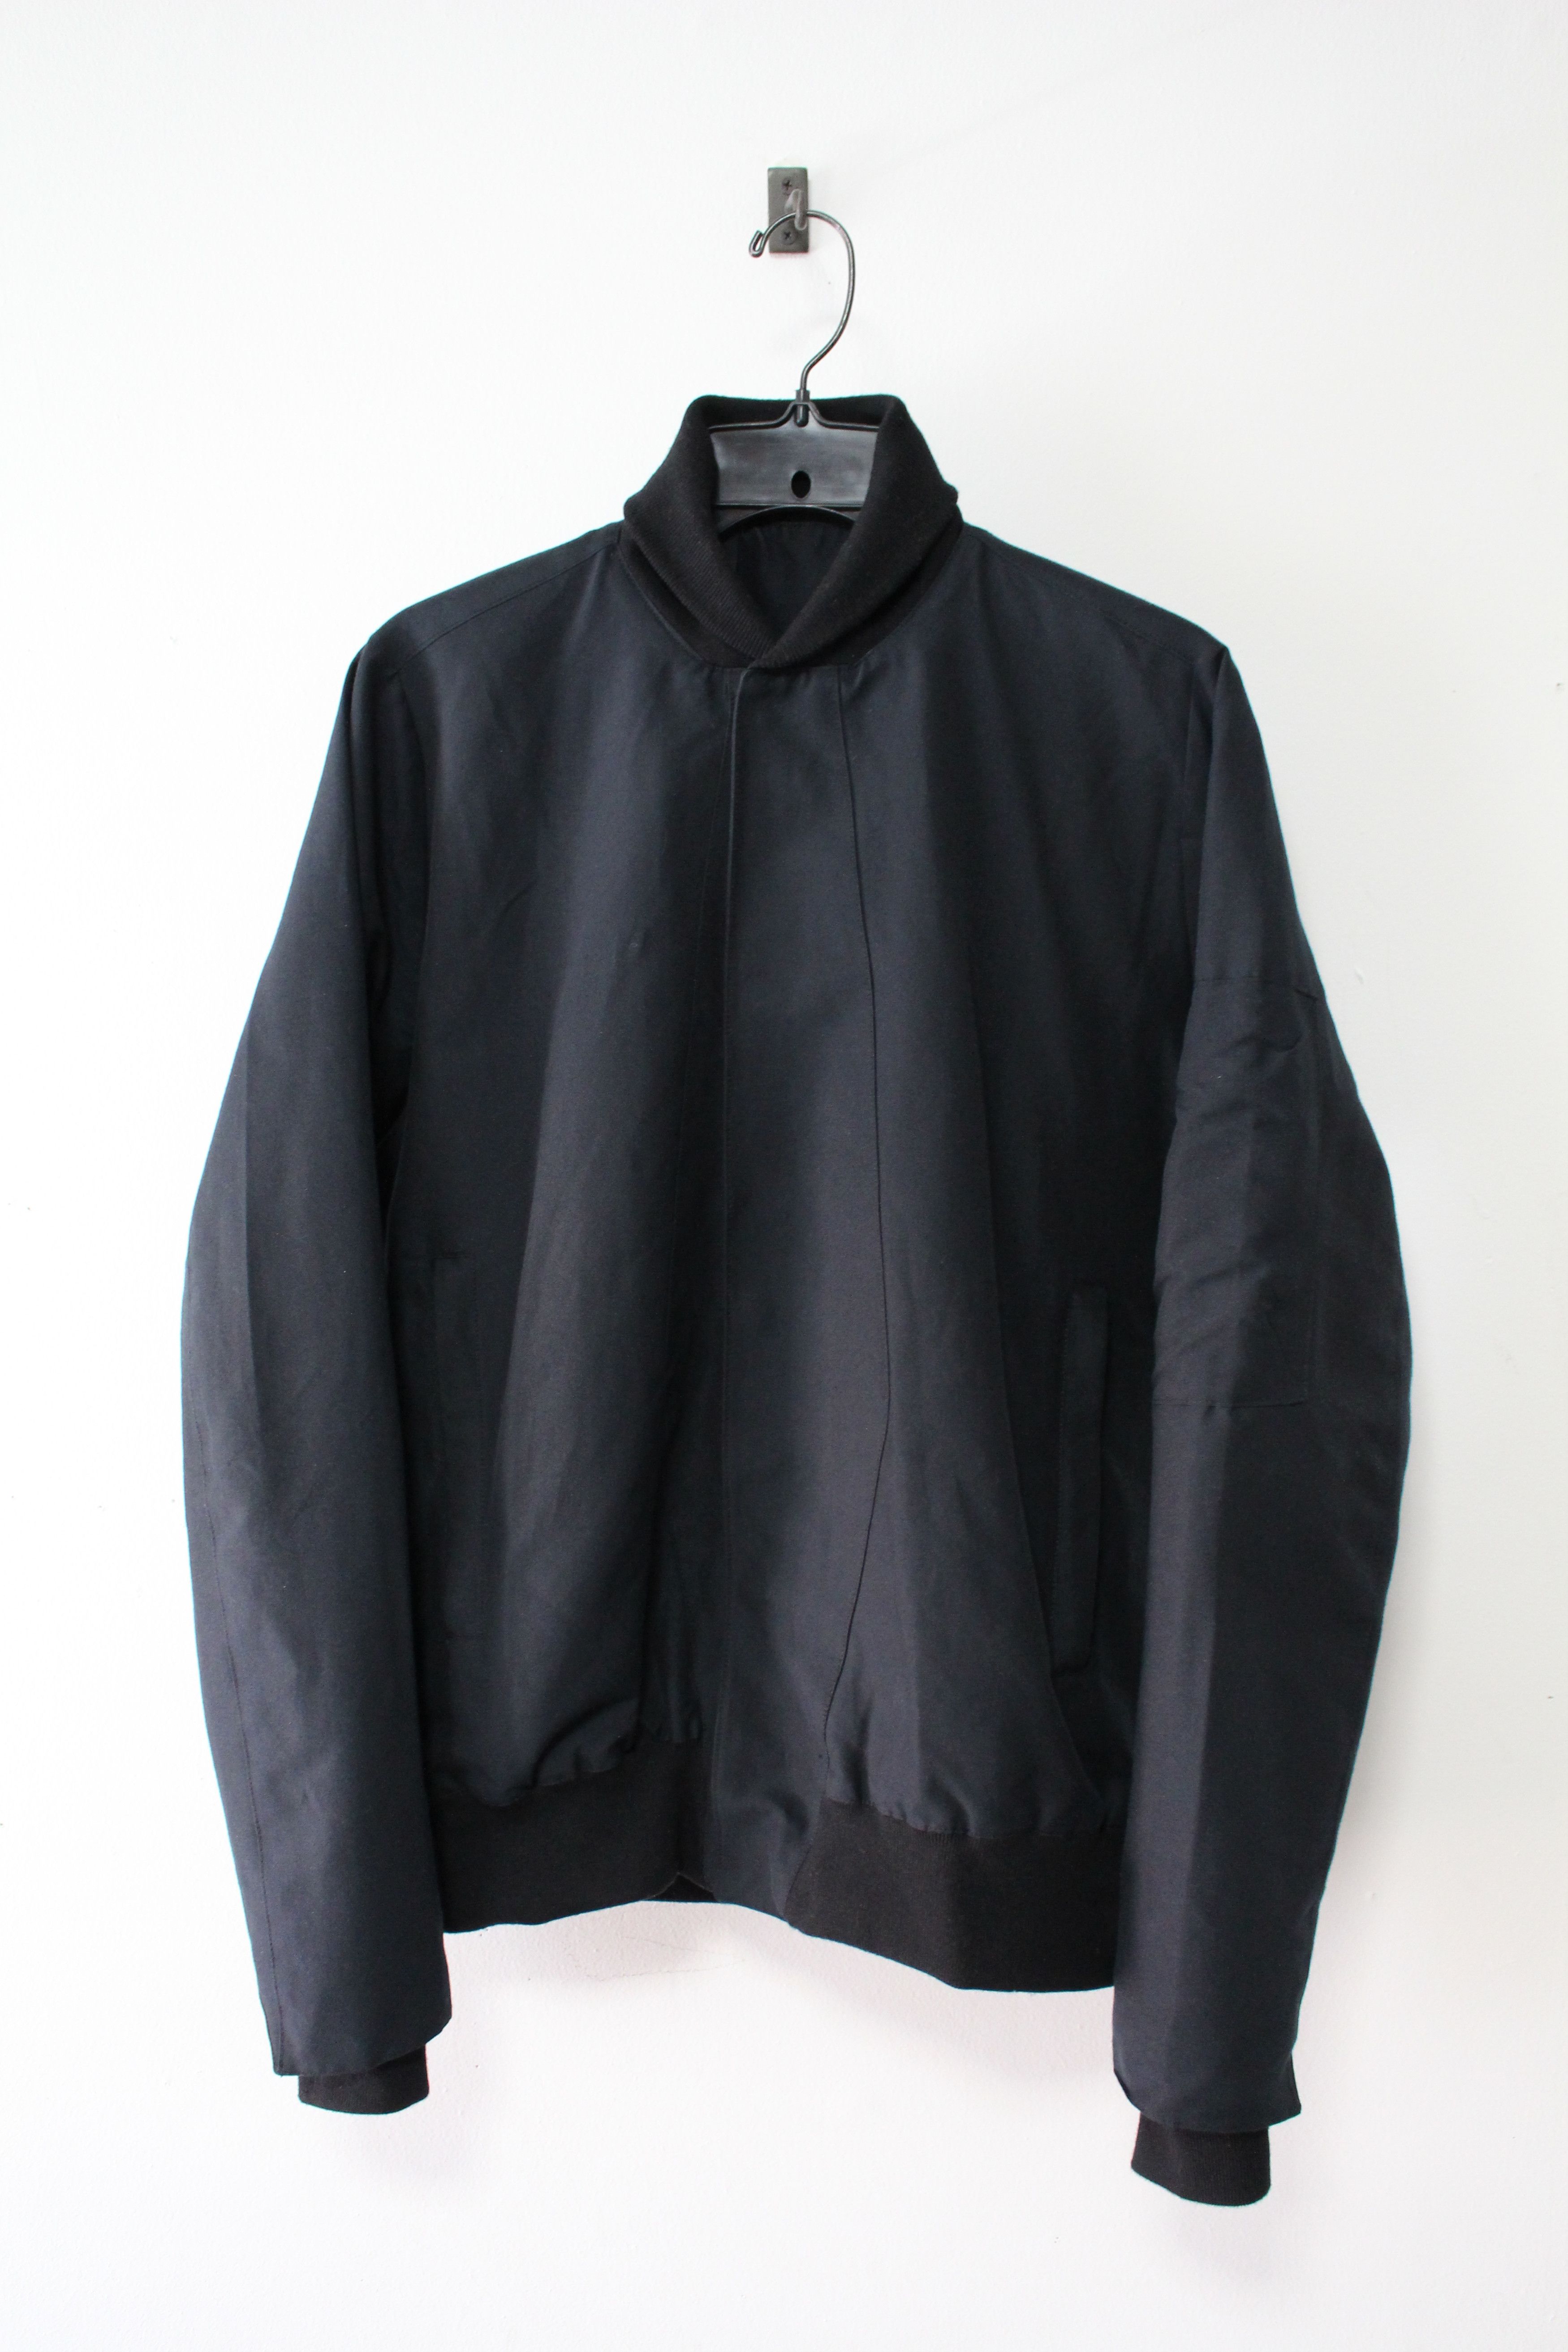 Siki Im SS13 Stealth MA-1 Silk Bomber Size US S / EU 44-46 / 1 - 1 Preview